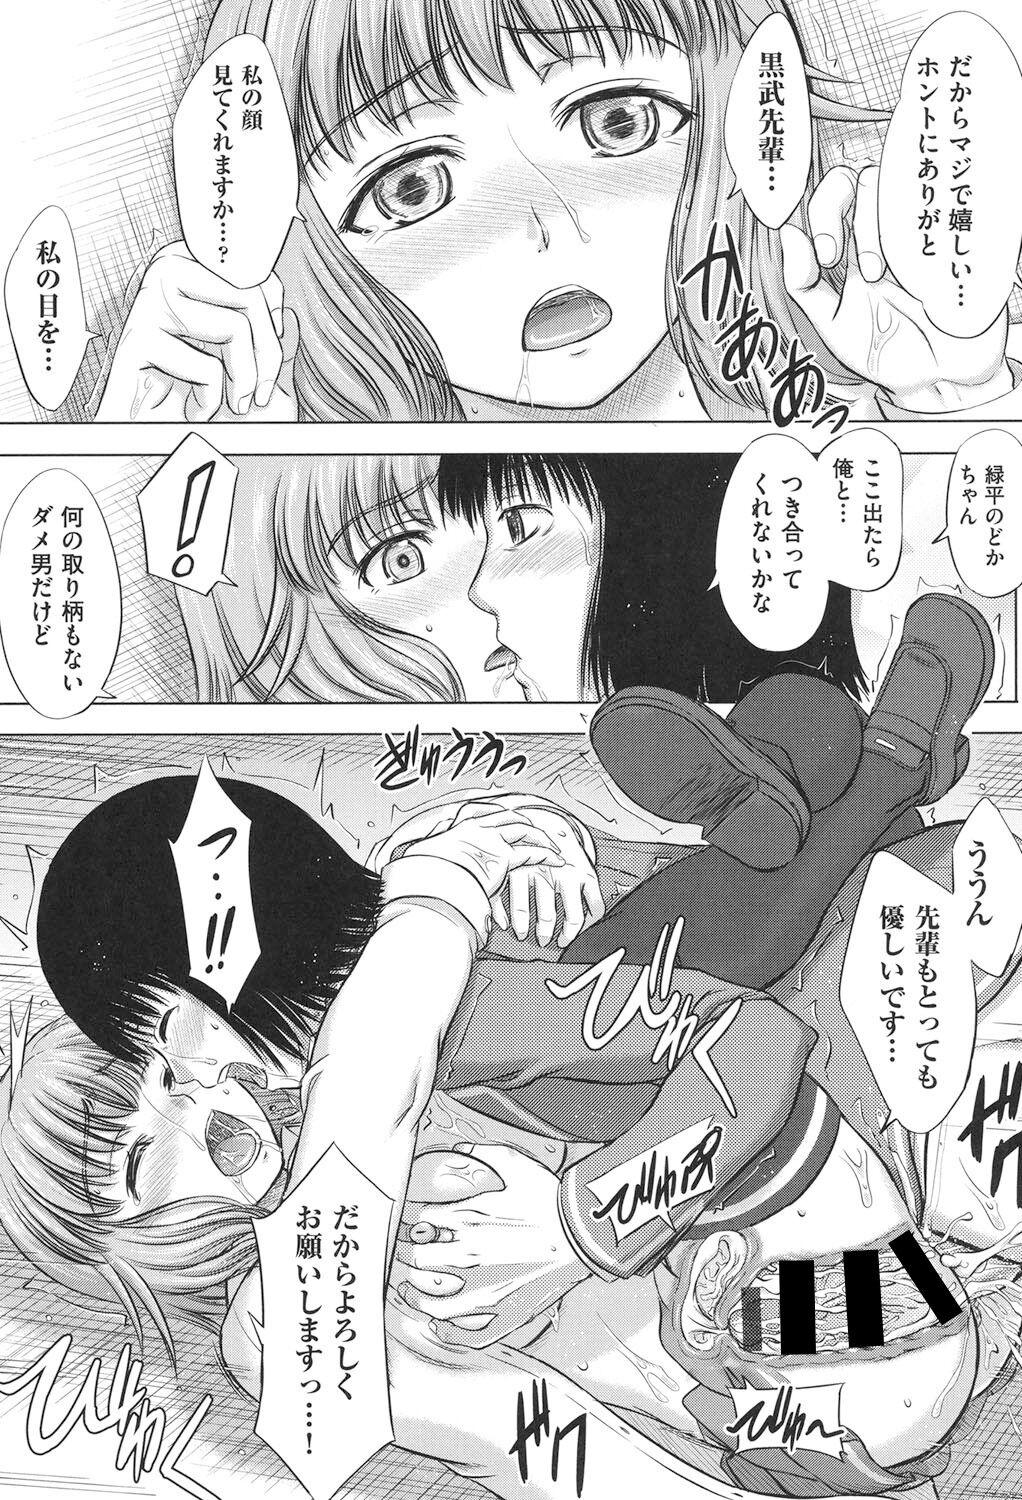 Houkago Kouhai Note - After School Mating Notes 71